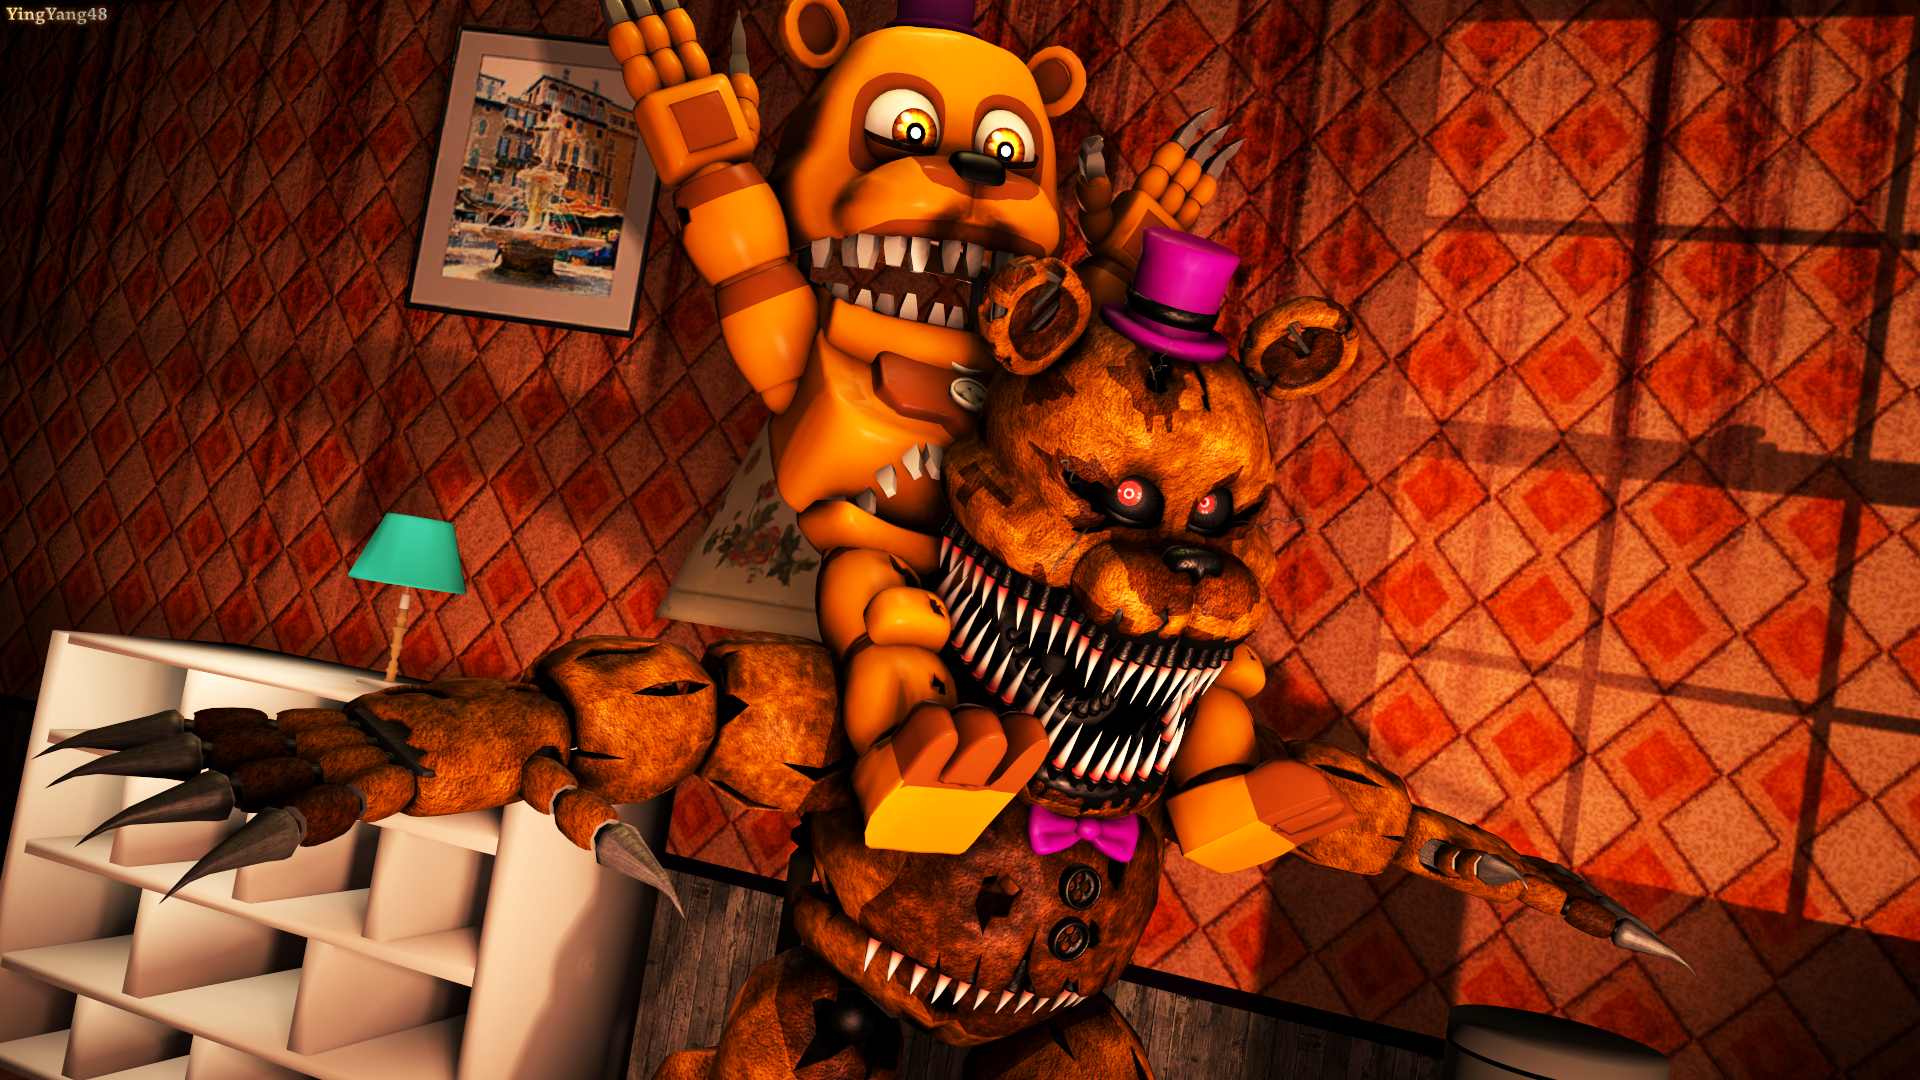 Video Game Five Nights At Freddy 039 S 4 1920x1080